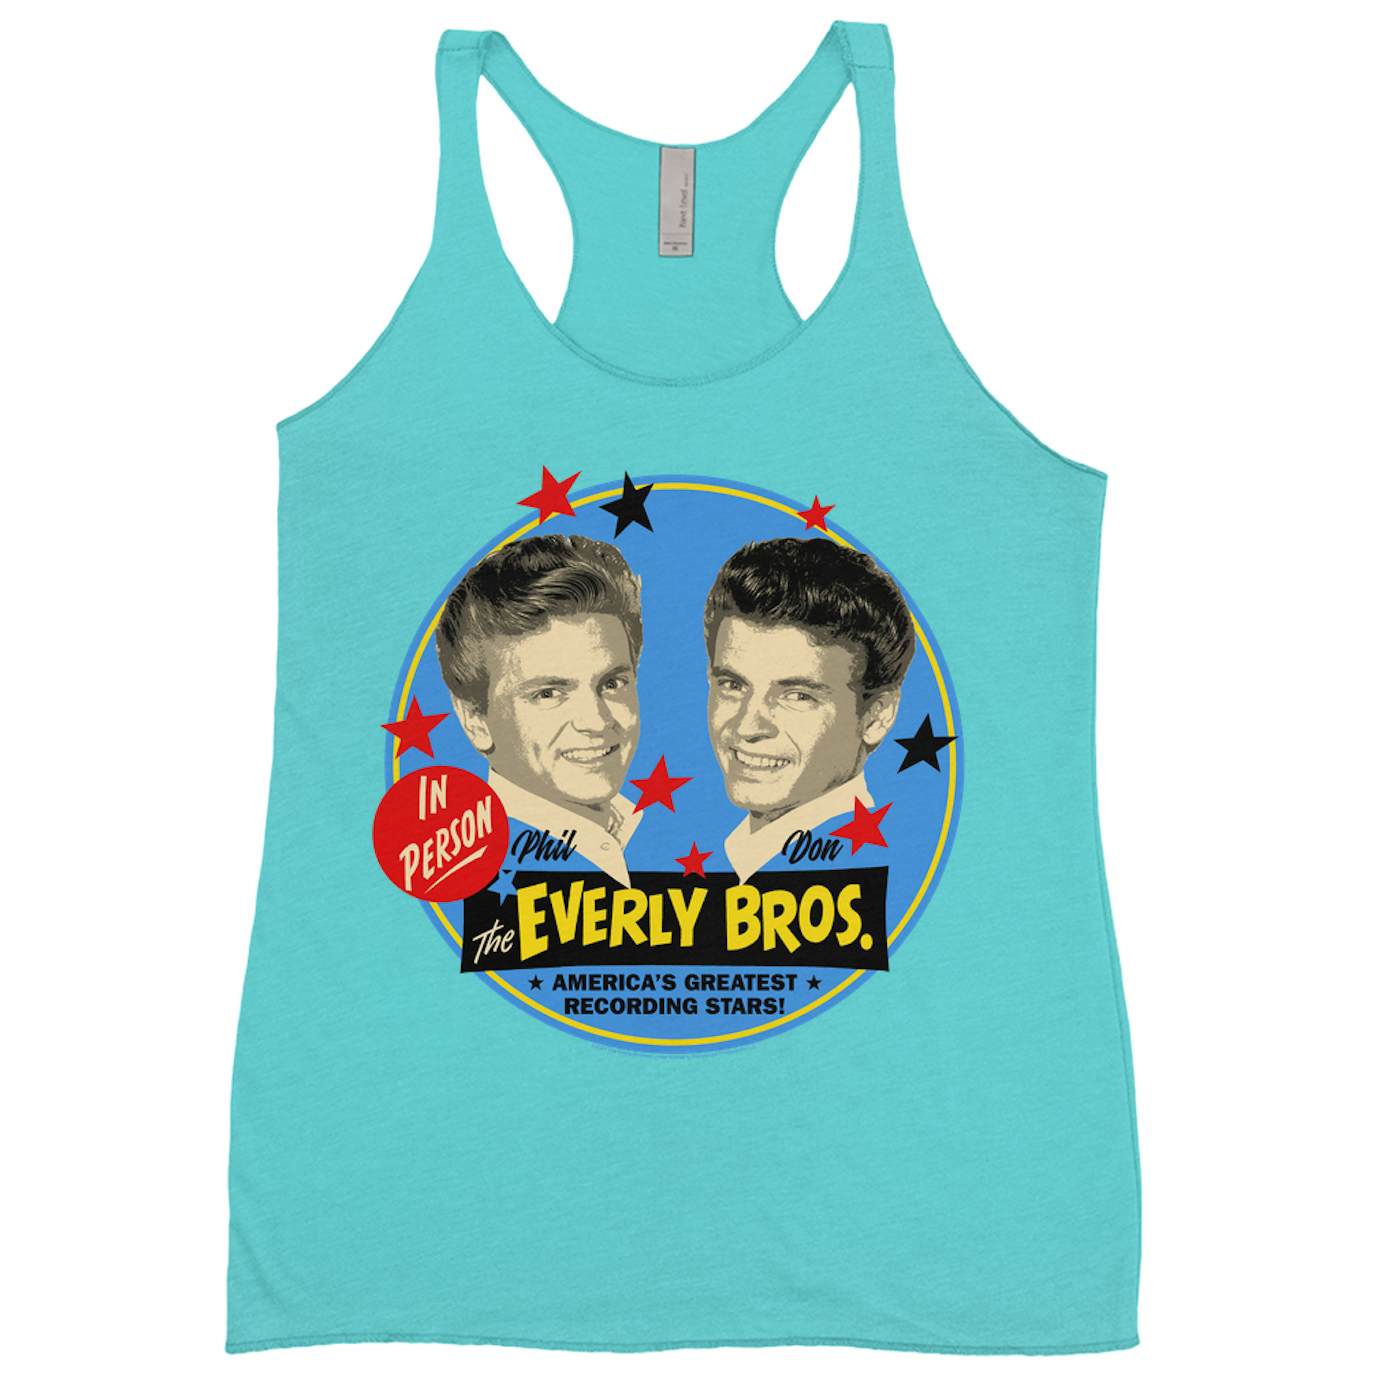 The Everly Brothers Ladies' Tank Top | America's Greatest Recording Stars Promotion Image The Everly Brothers Shirt